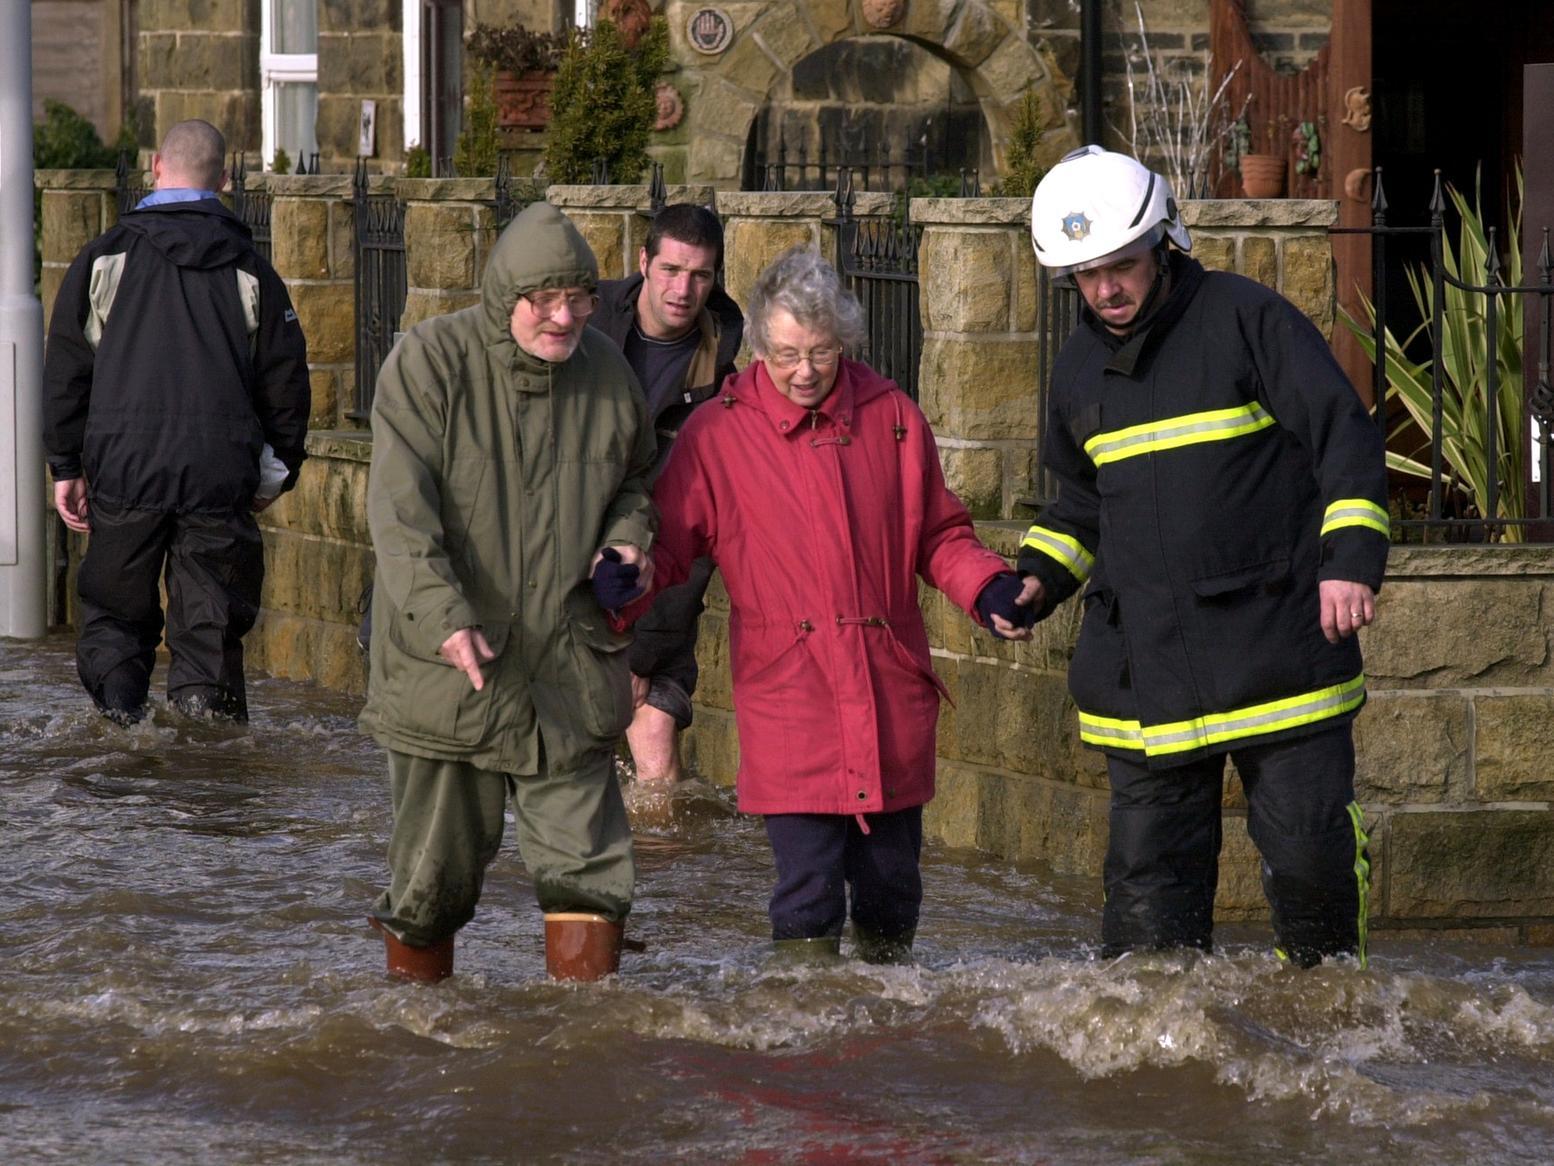 A firefighter helps a couple across the floodwaters on Bridge Street, Otley.